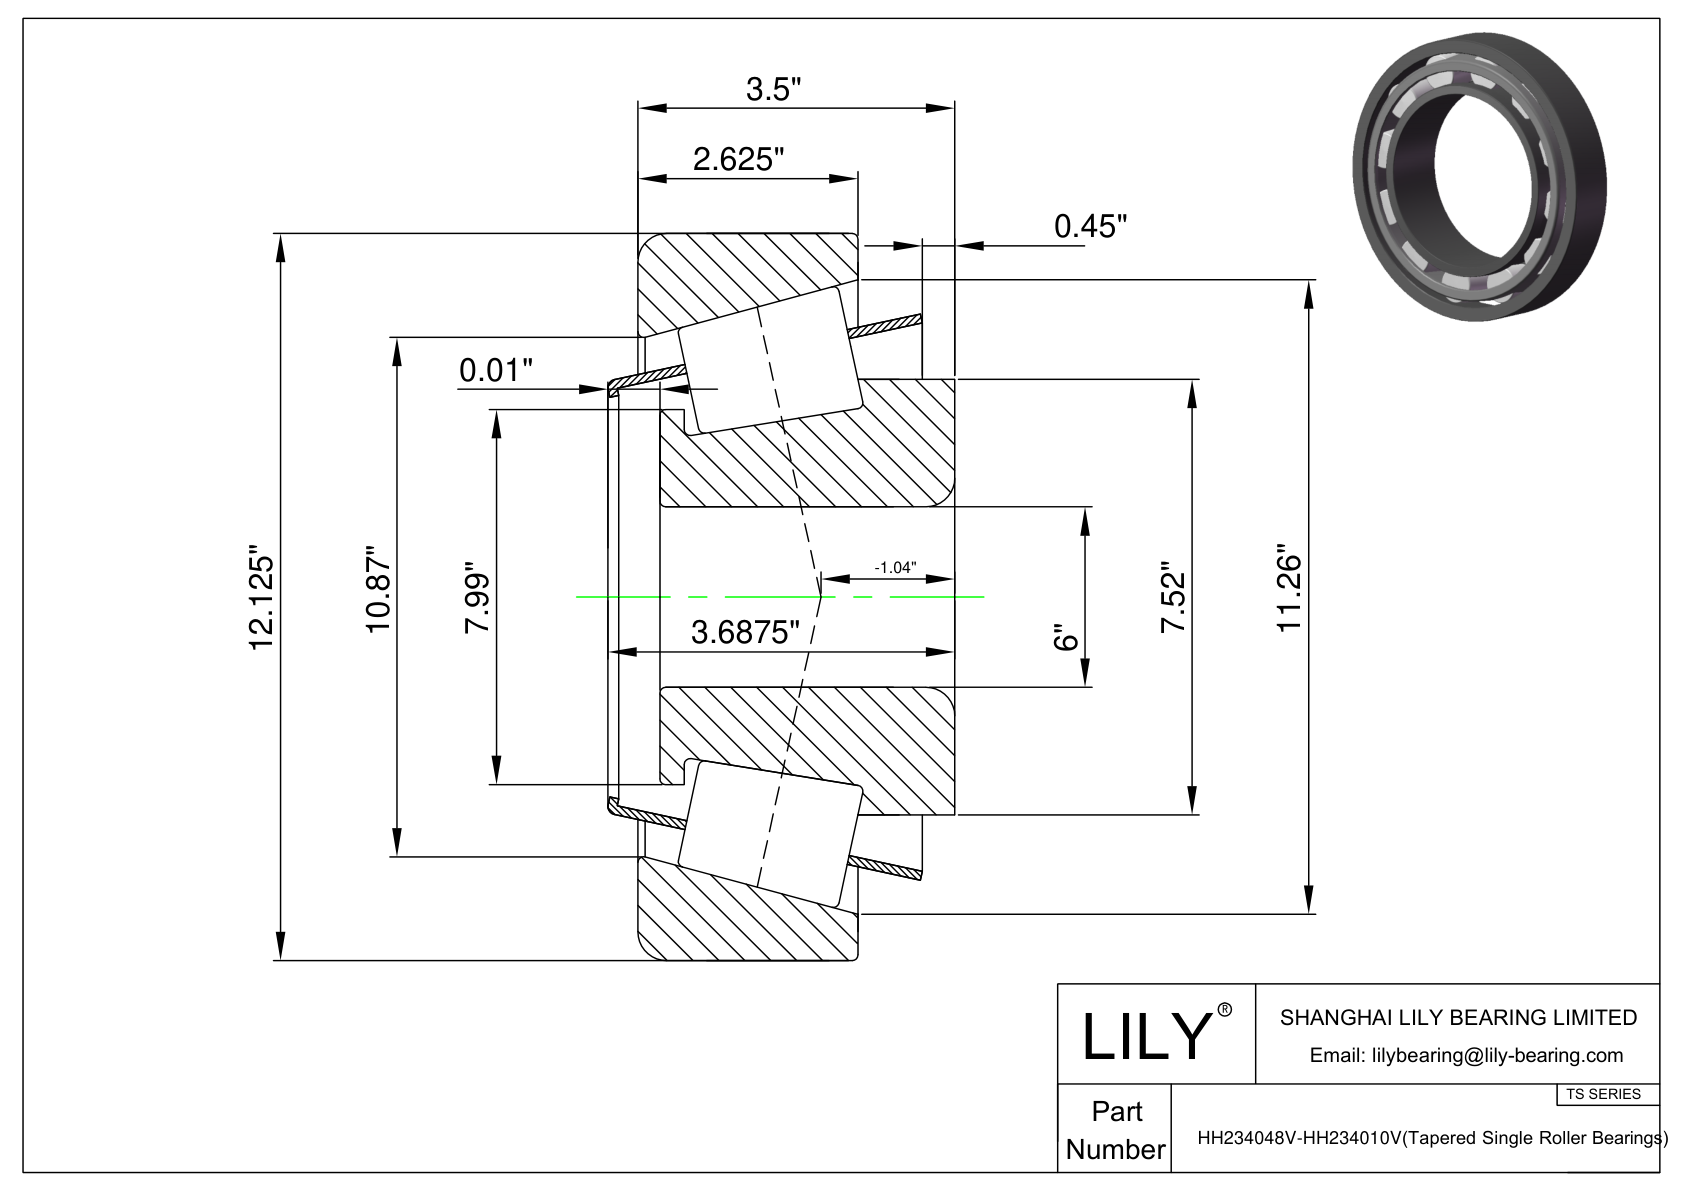 HH234048V-HH234010V TS (Tapered Single Roller Bearings) (Imperial) cad drawing